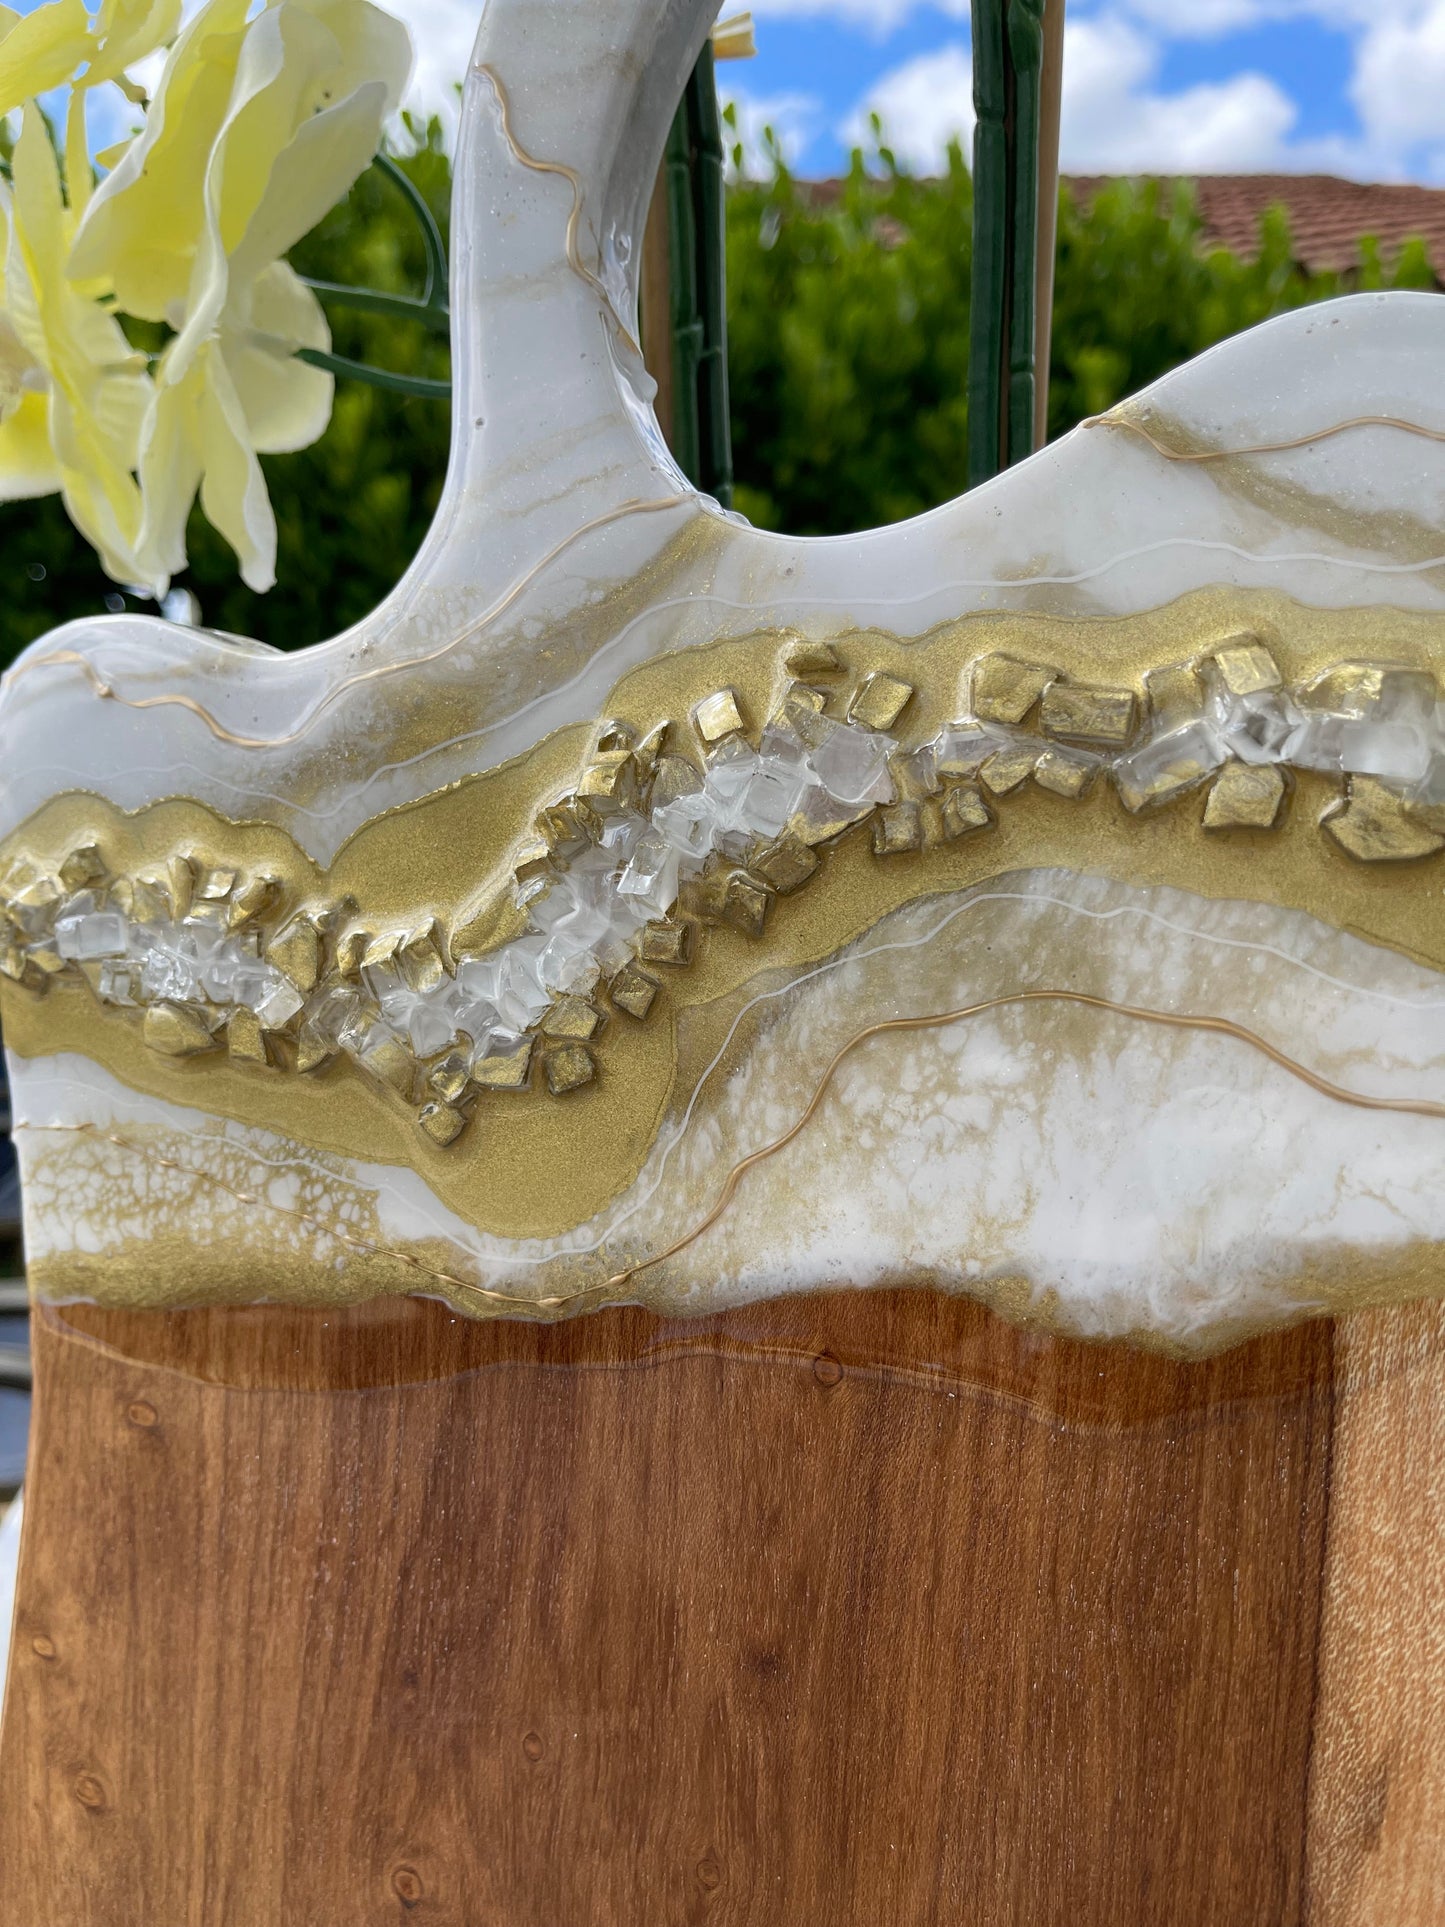 Gold & White Geode Resin Serving Board, Large